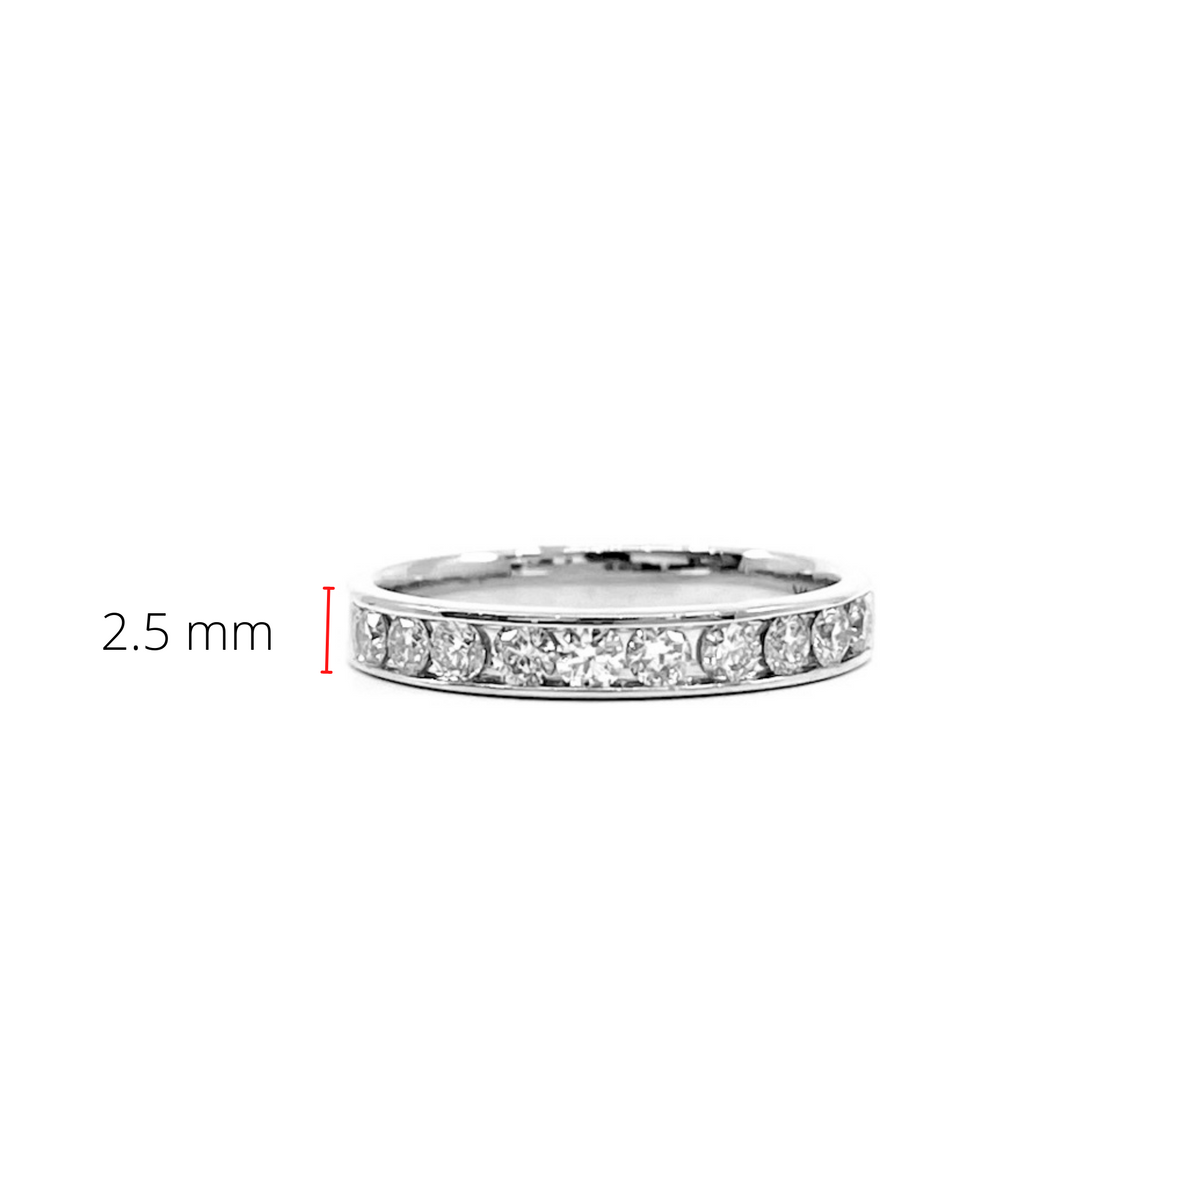 14K White Gold 0.50cttw Diamond Anniversary Channel Set Ring / Band, size 6.5